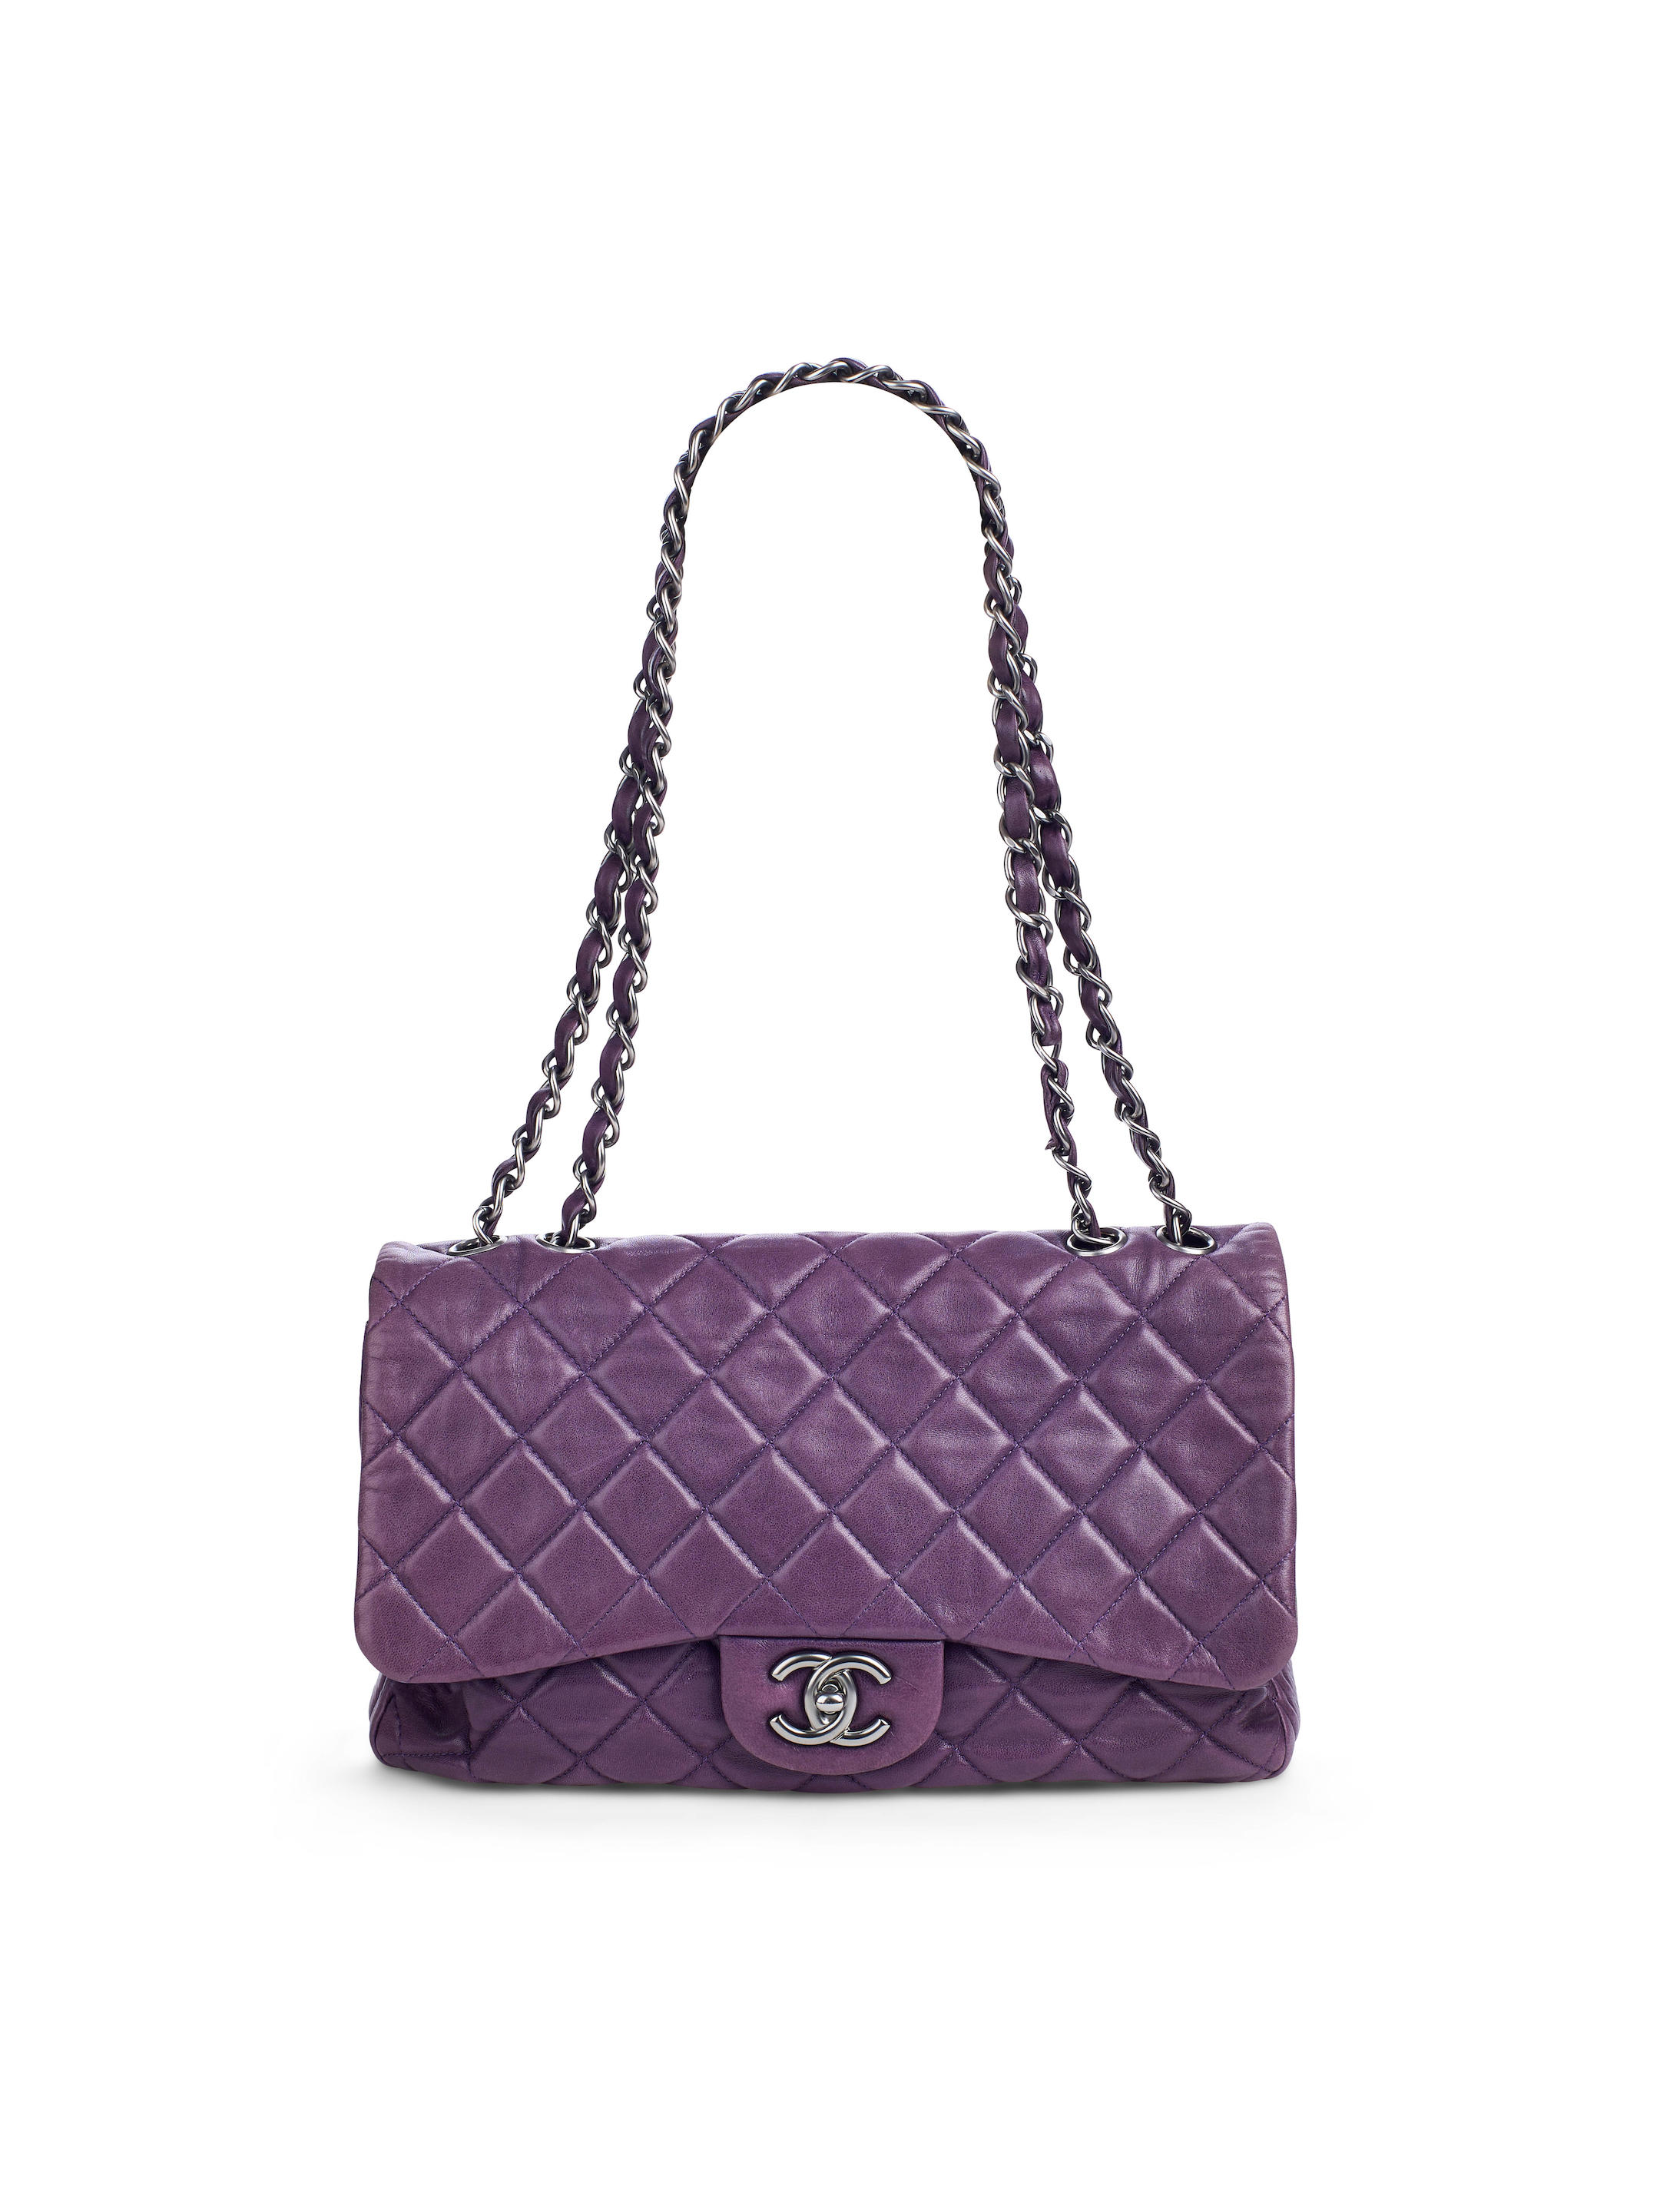 Bonhams : CHANEL PURPLE LAMBSKIN BIG CLASSIC FLAG BAG SILVER TONED HARDWARE  (includes serial sticker, info booklet, authenticity card)